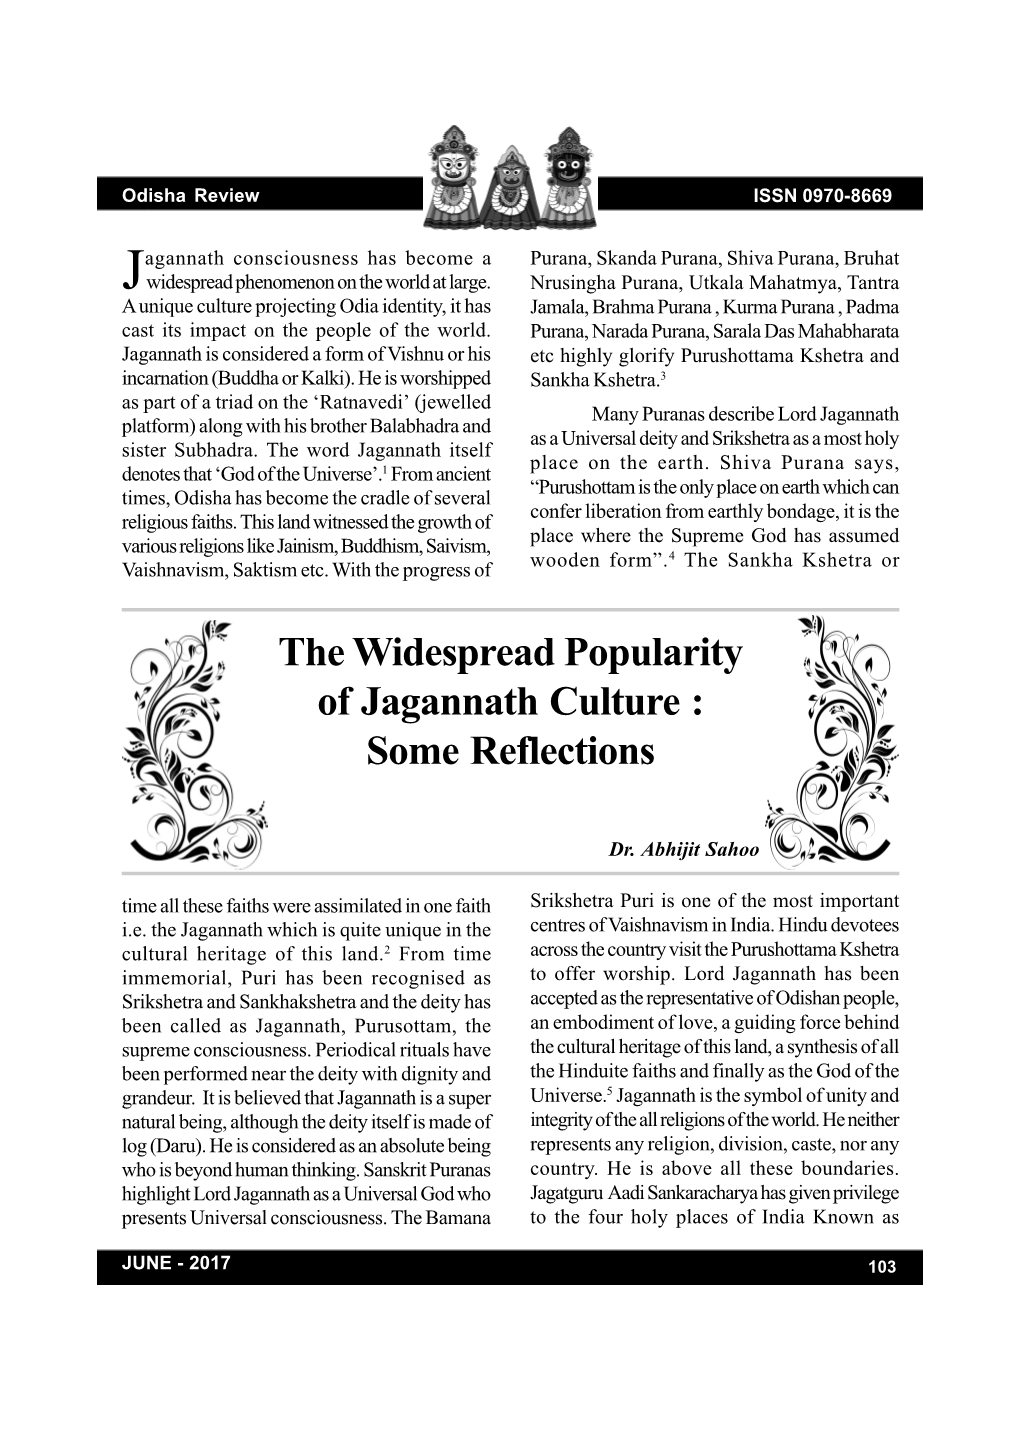 The Widespread Popularity of Jagannath Culture : Some Reflections